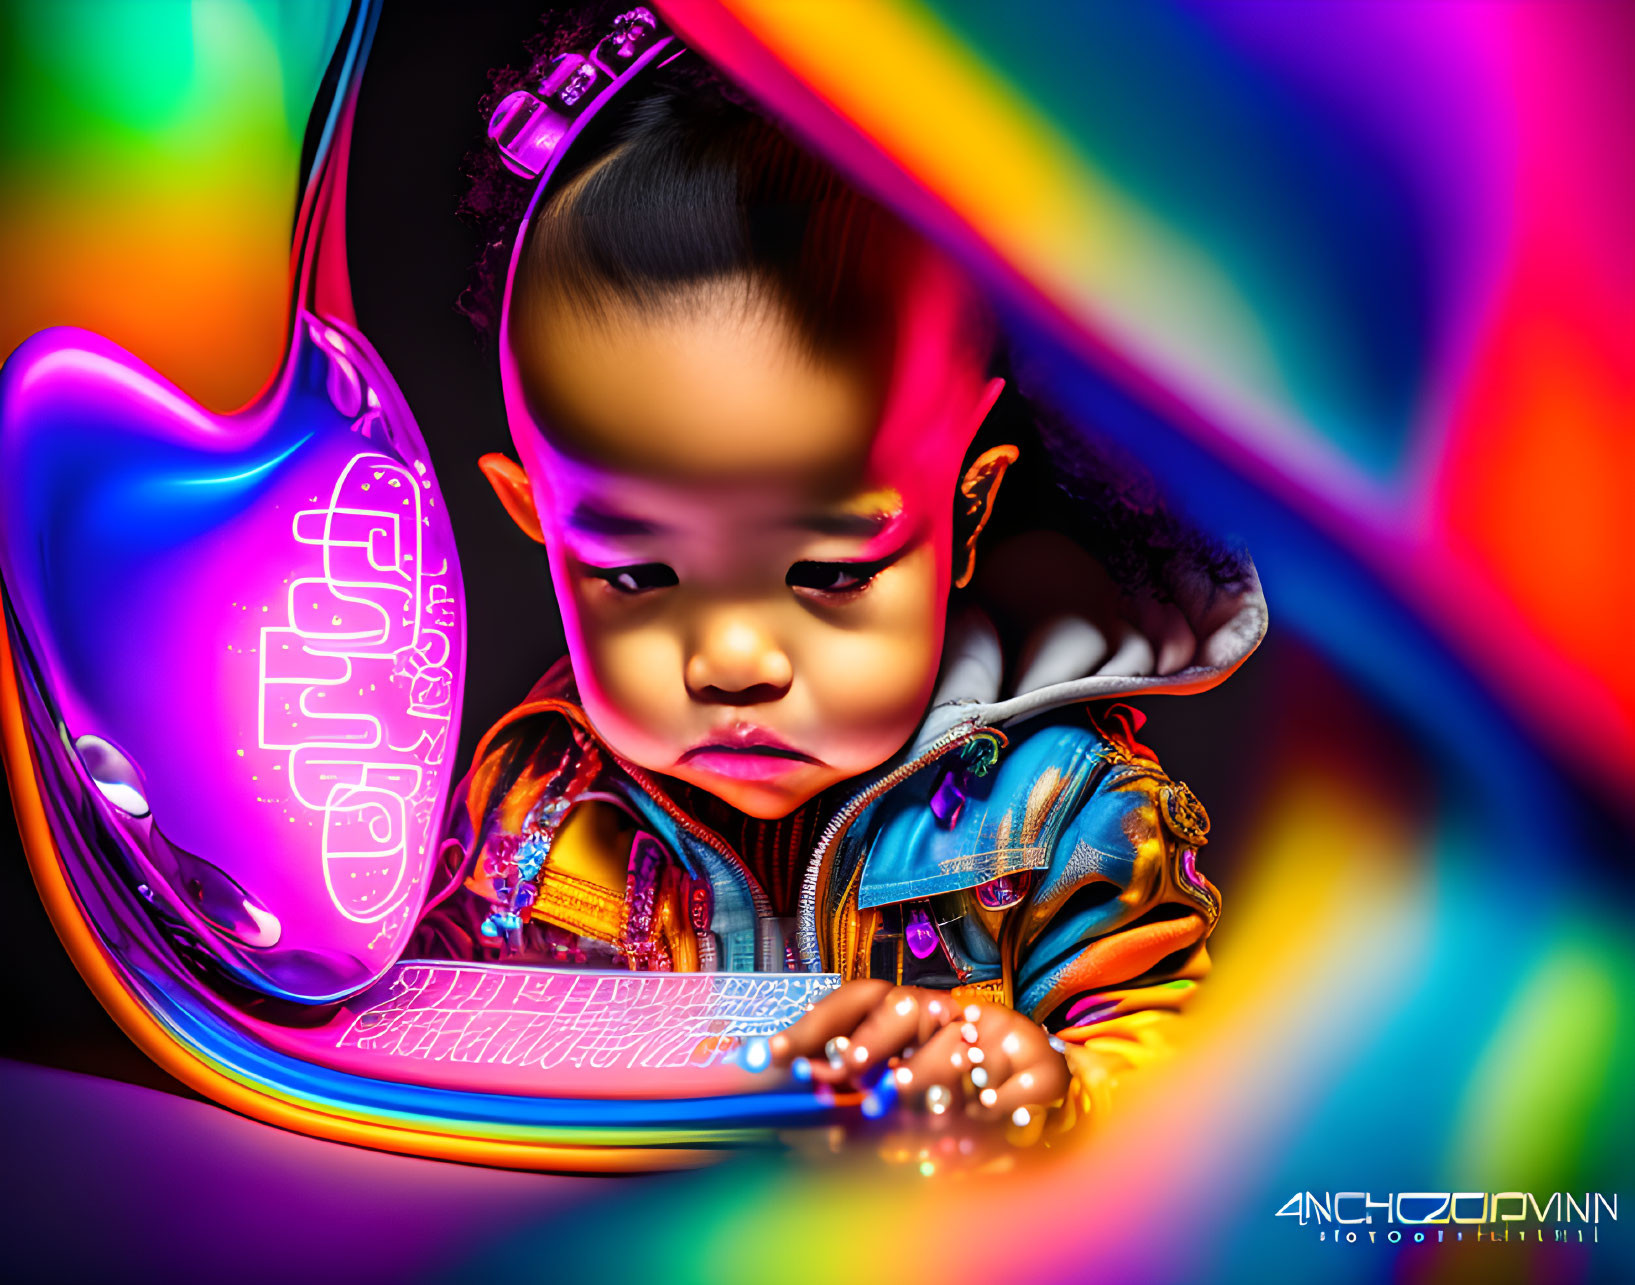 Child immersed in vibrant digital art with futuristic keyboard